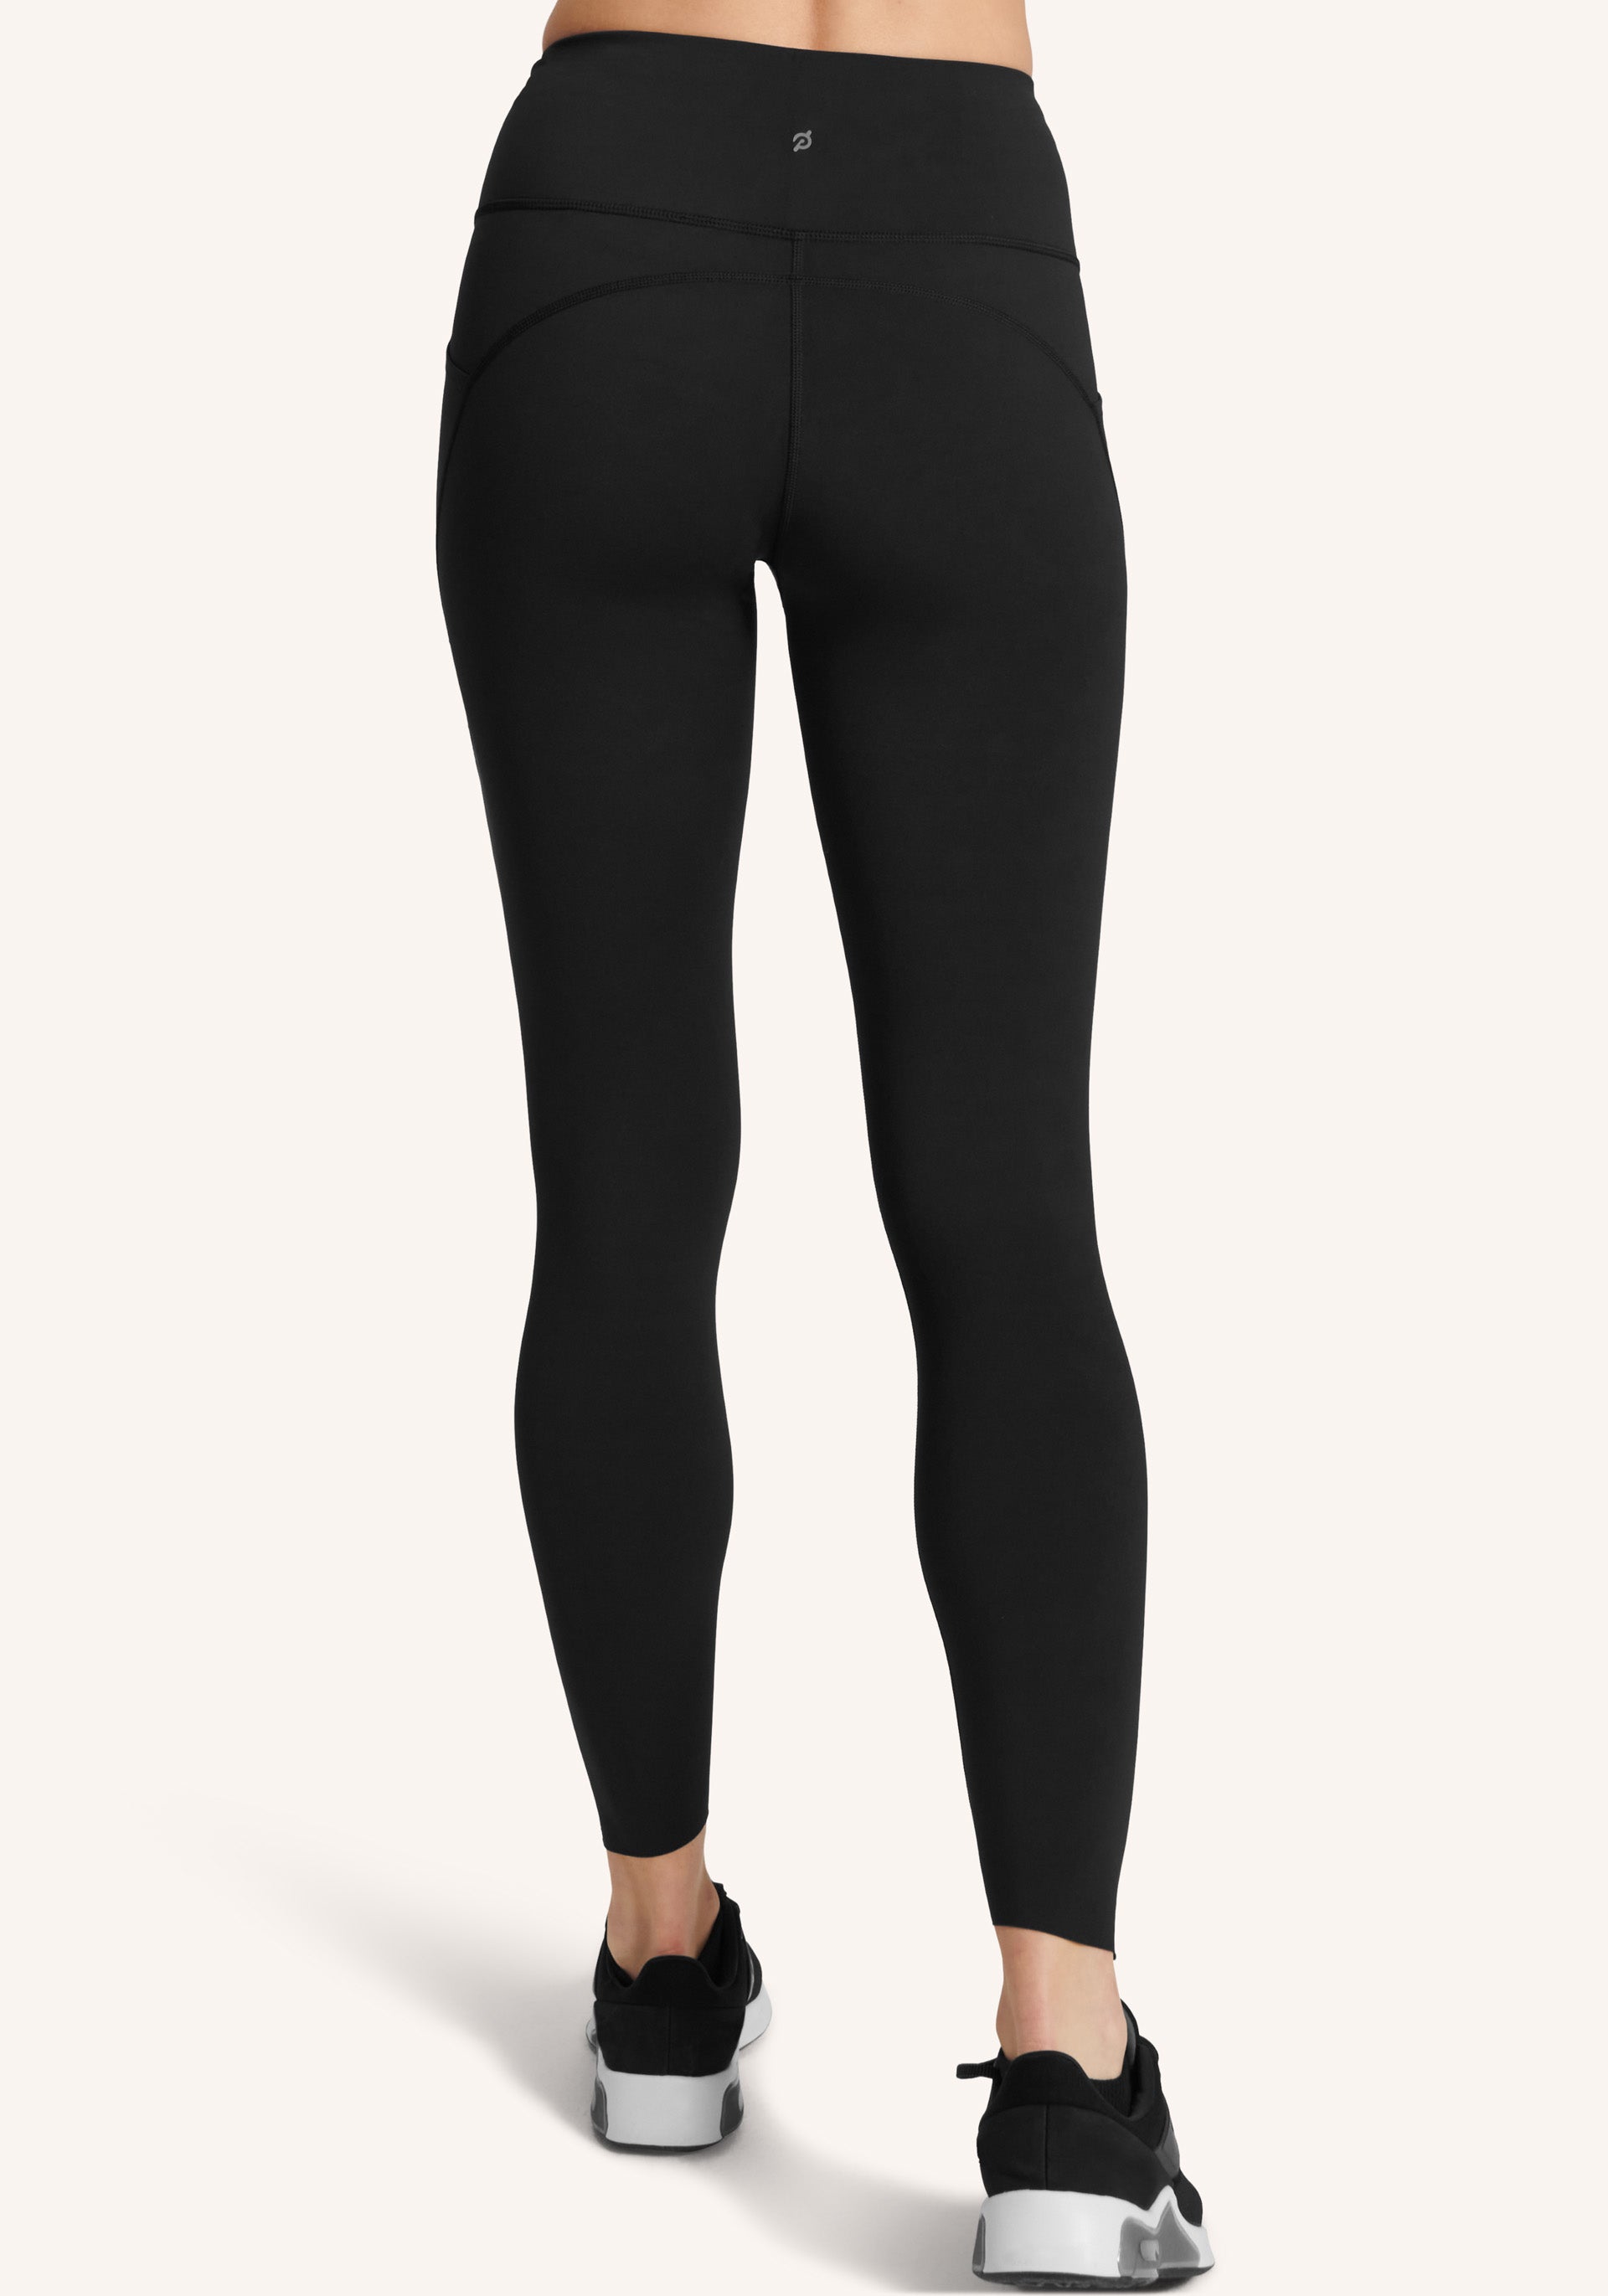 ApeFit Workout Leggings with Resistance Bands Black NWT with Book